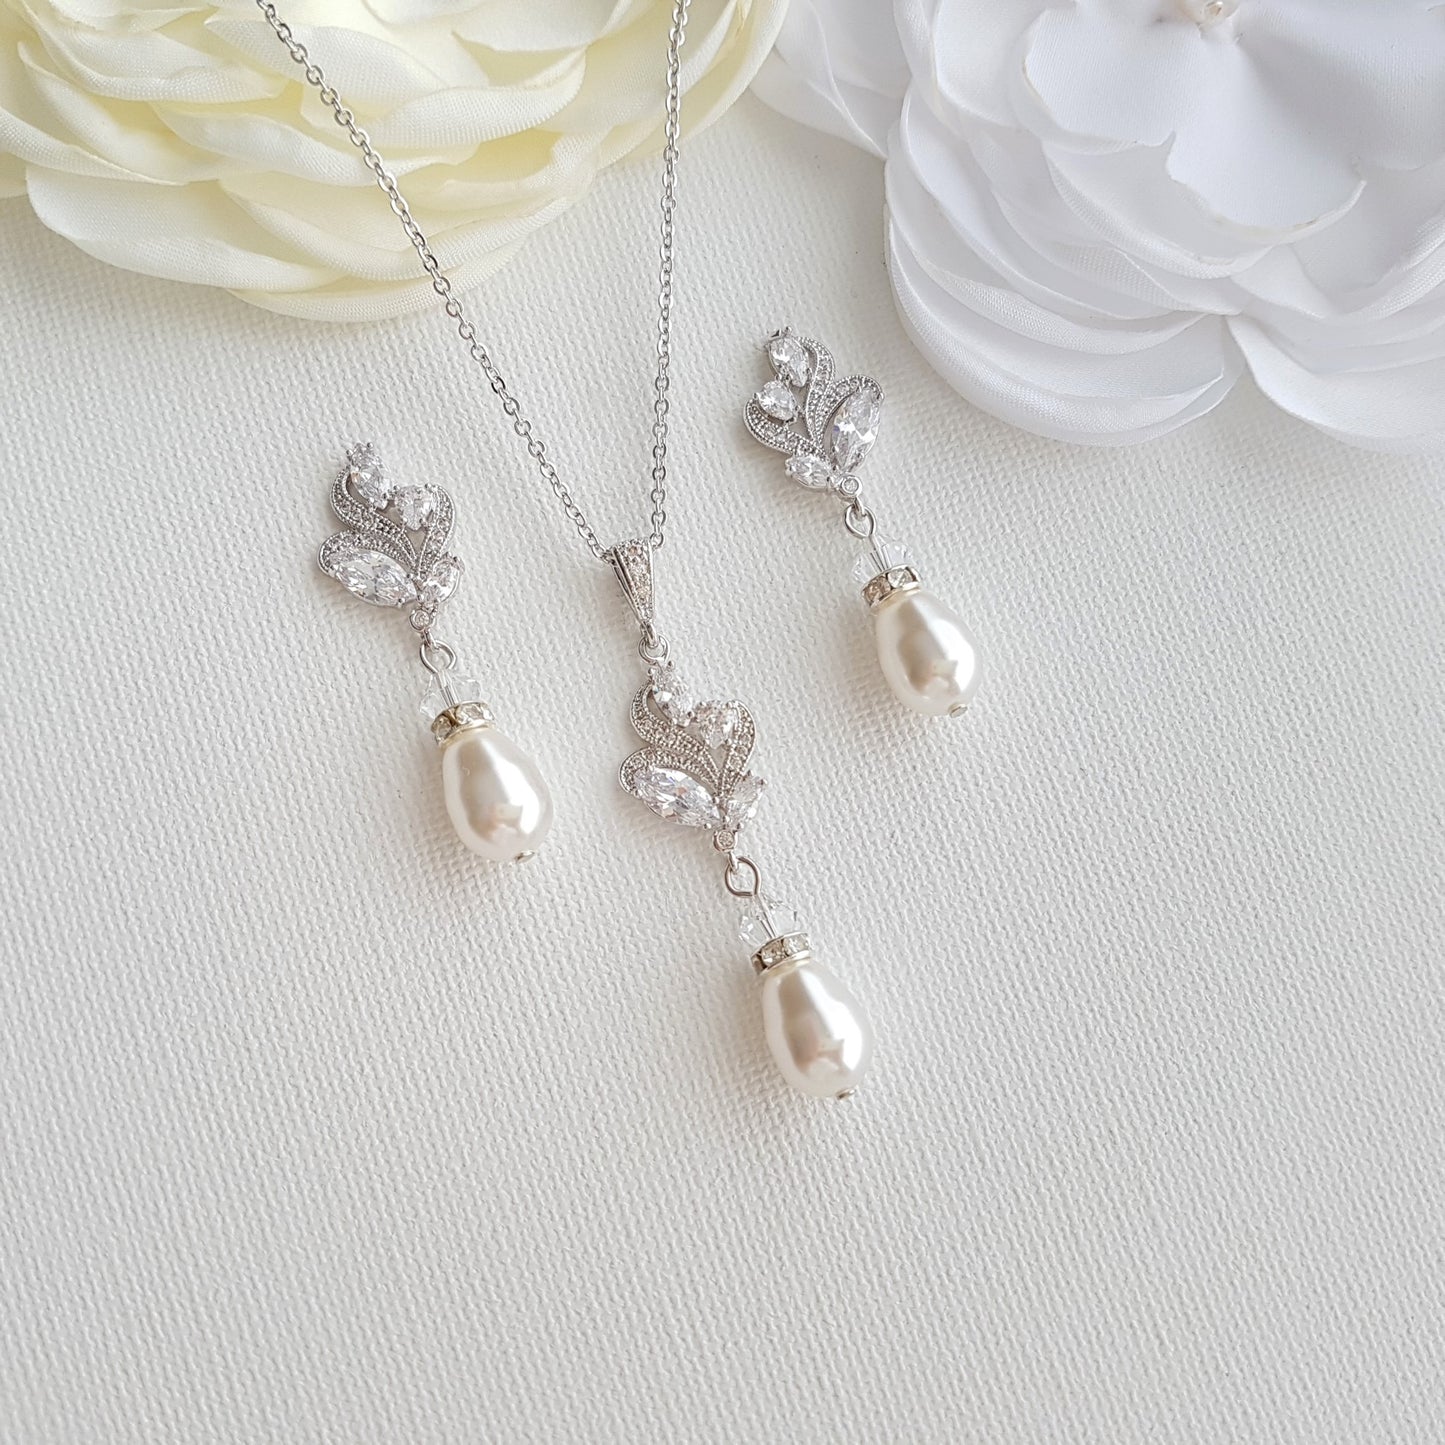 Vintage Style Pearl Jewelry Set for Brides in Rose Gold-Wavy